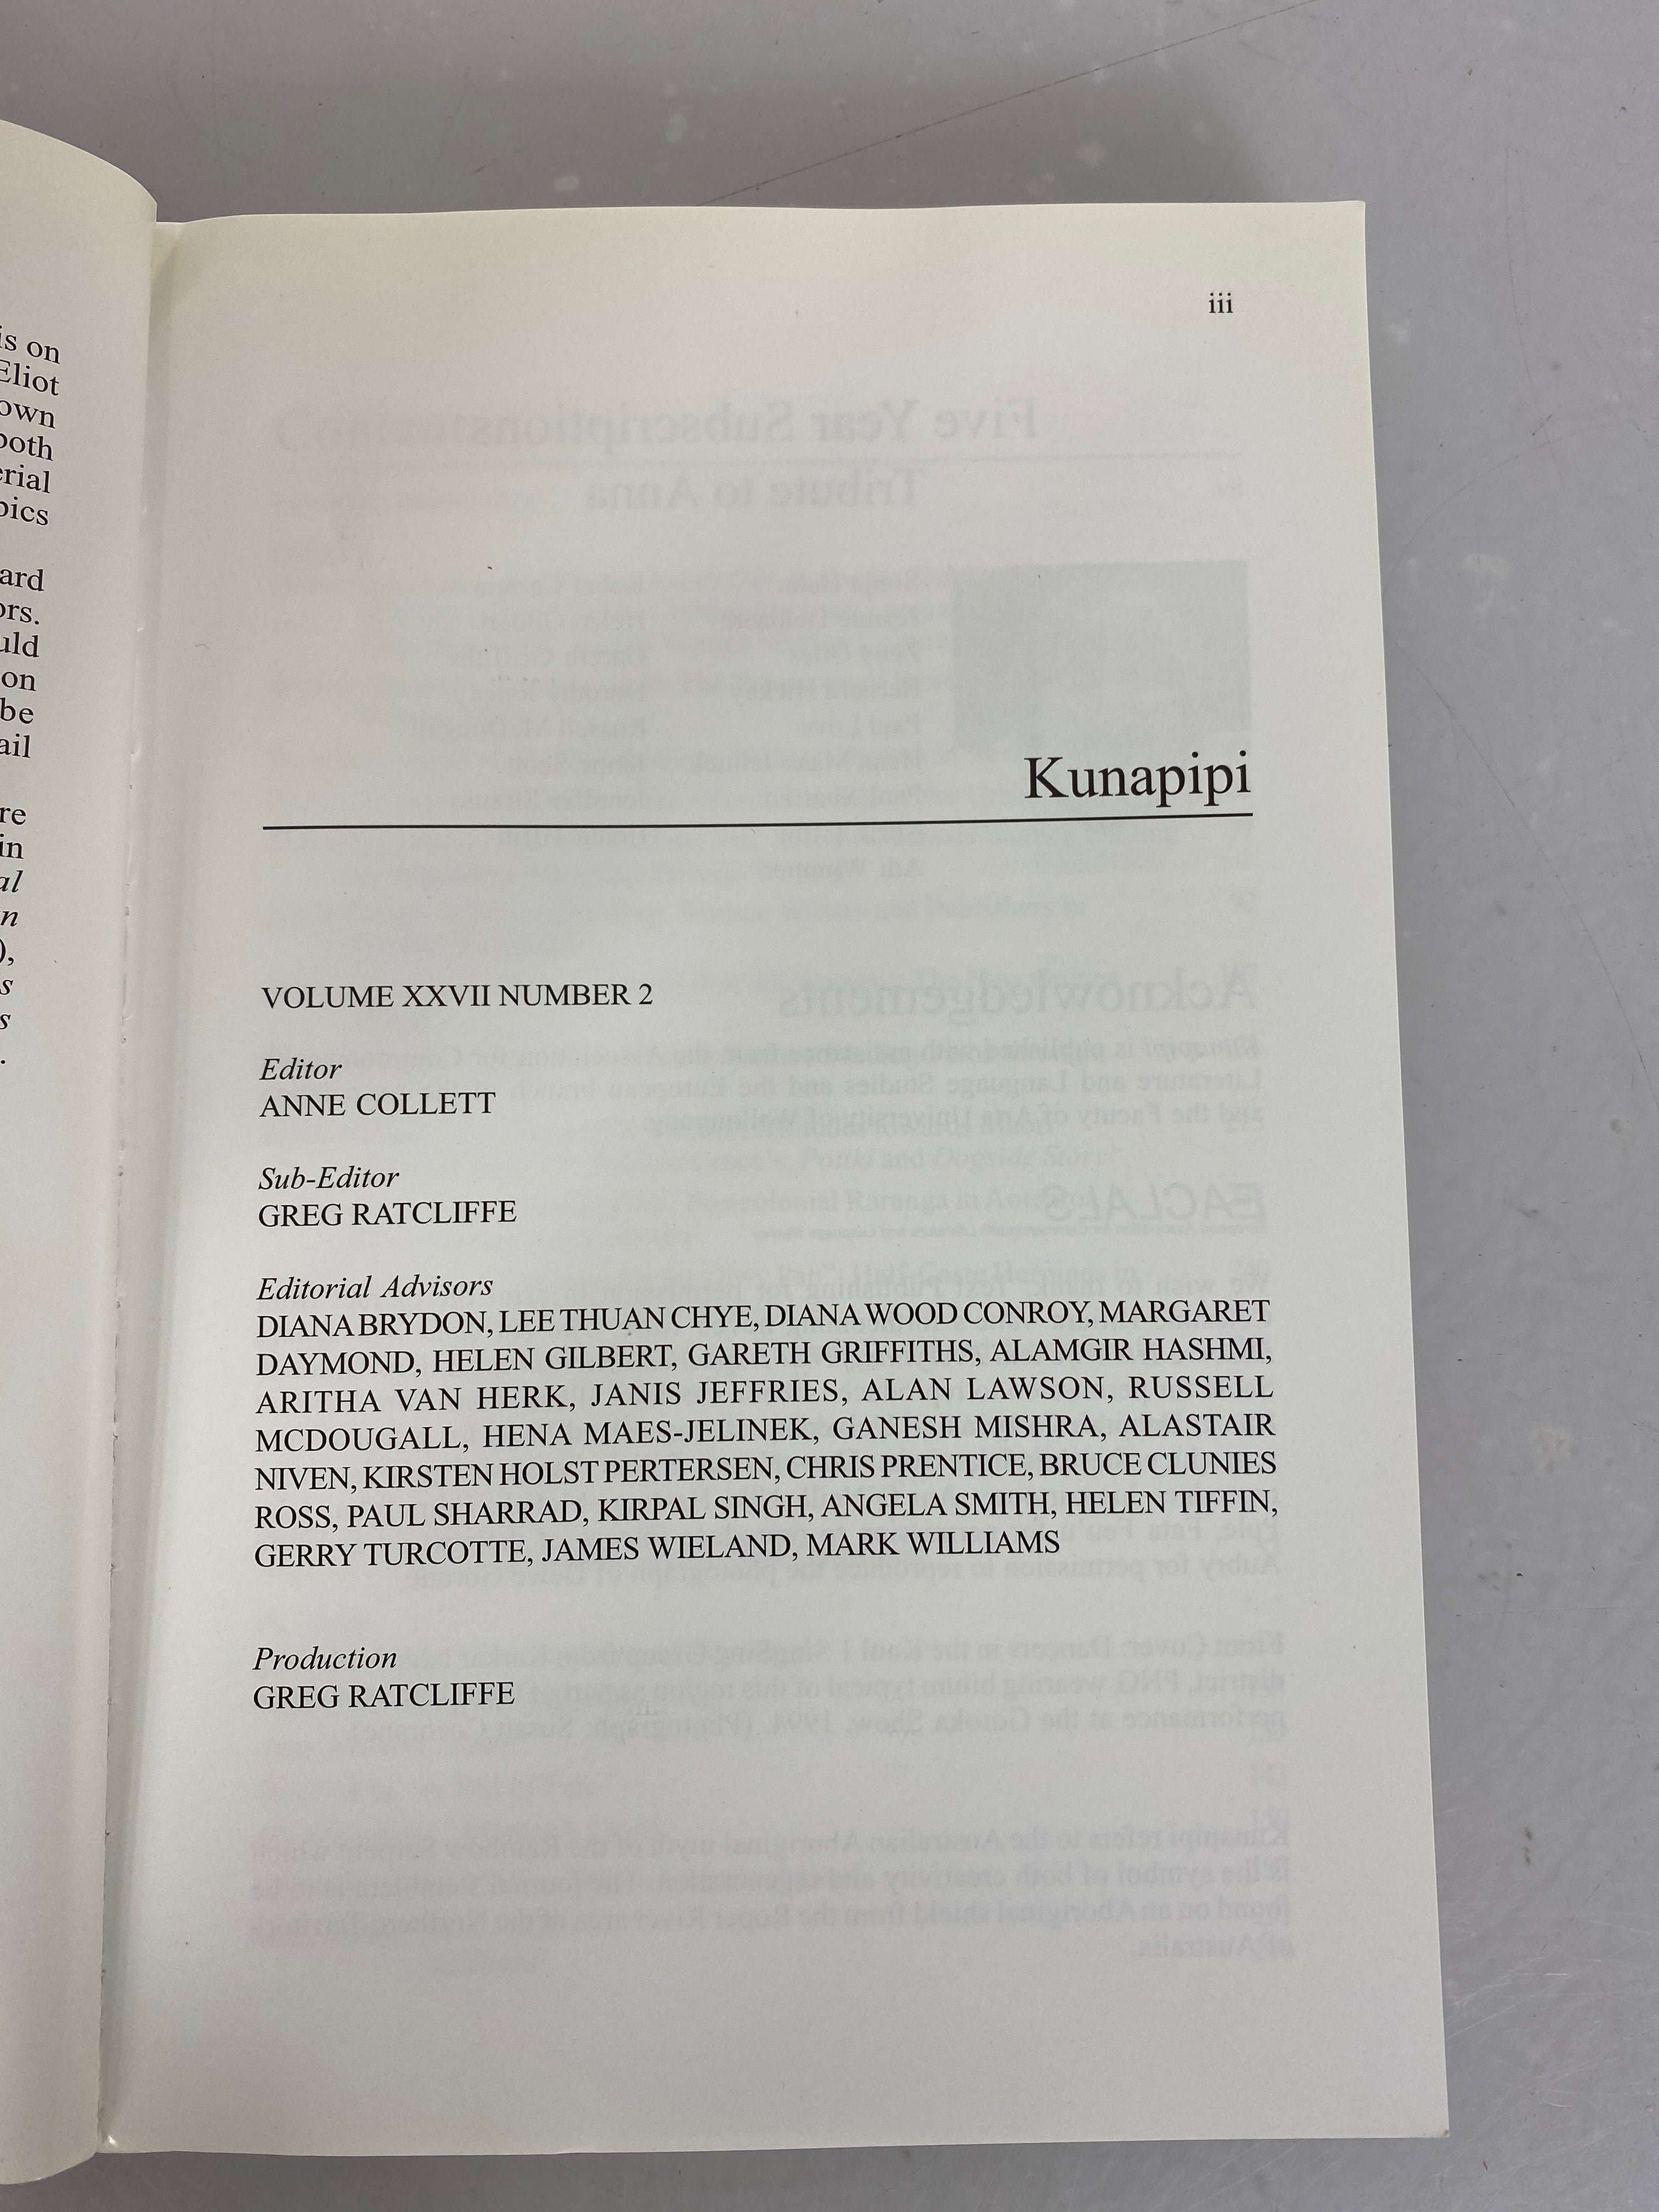 Lot of 2 Issues Kunapipi Journal of Postcolonial Writing Vol 27 Numbers 1 and 2 SC Rare